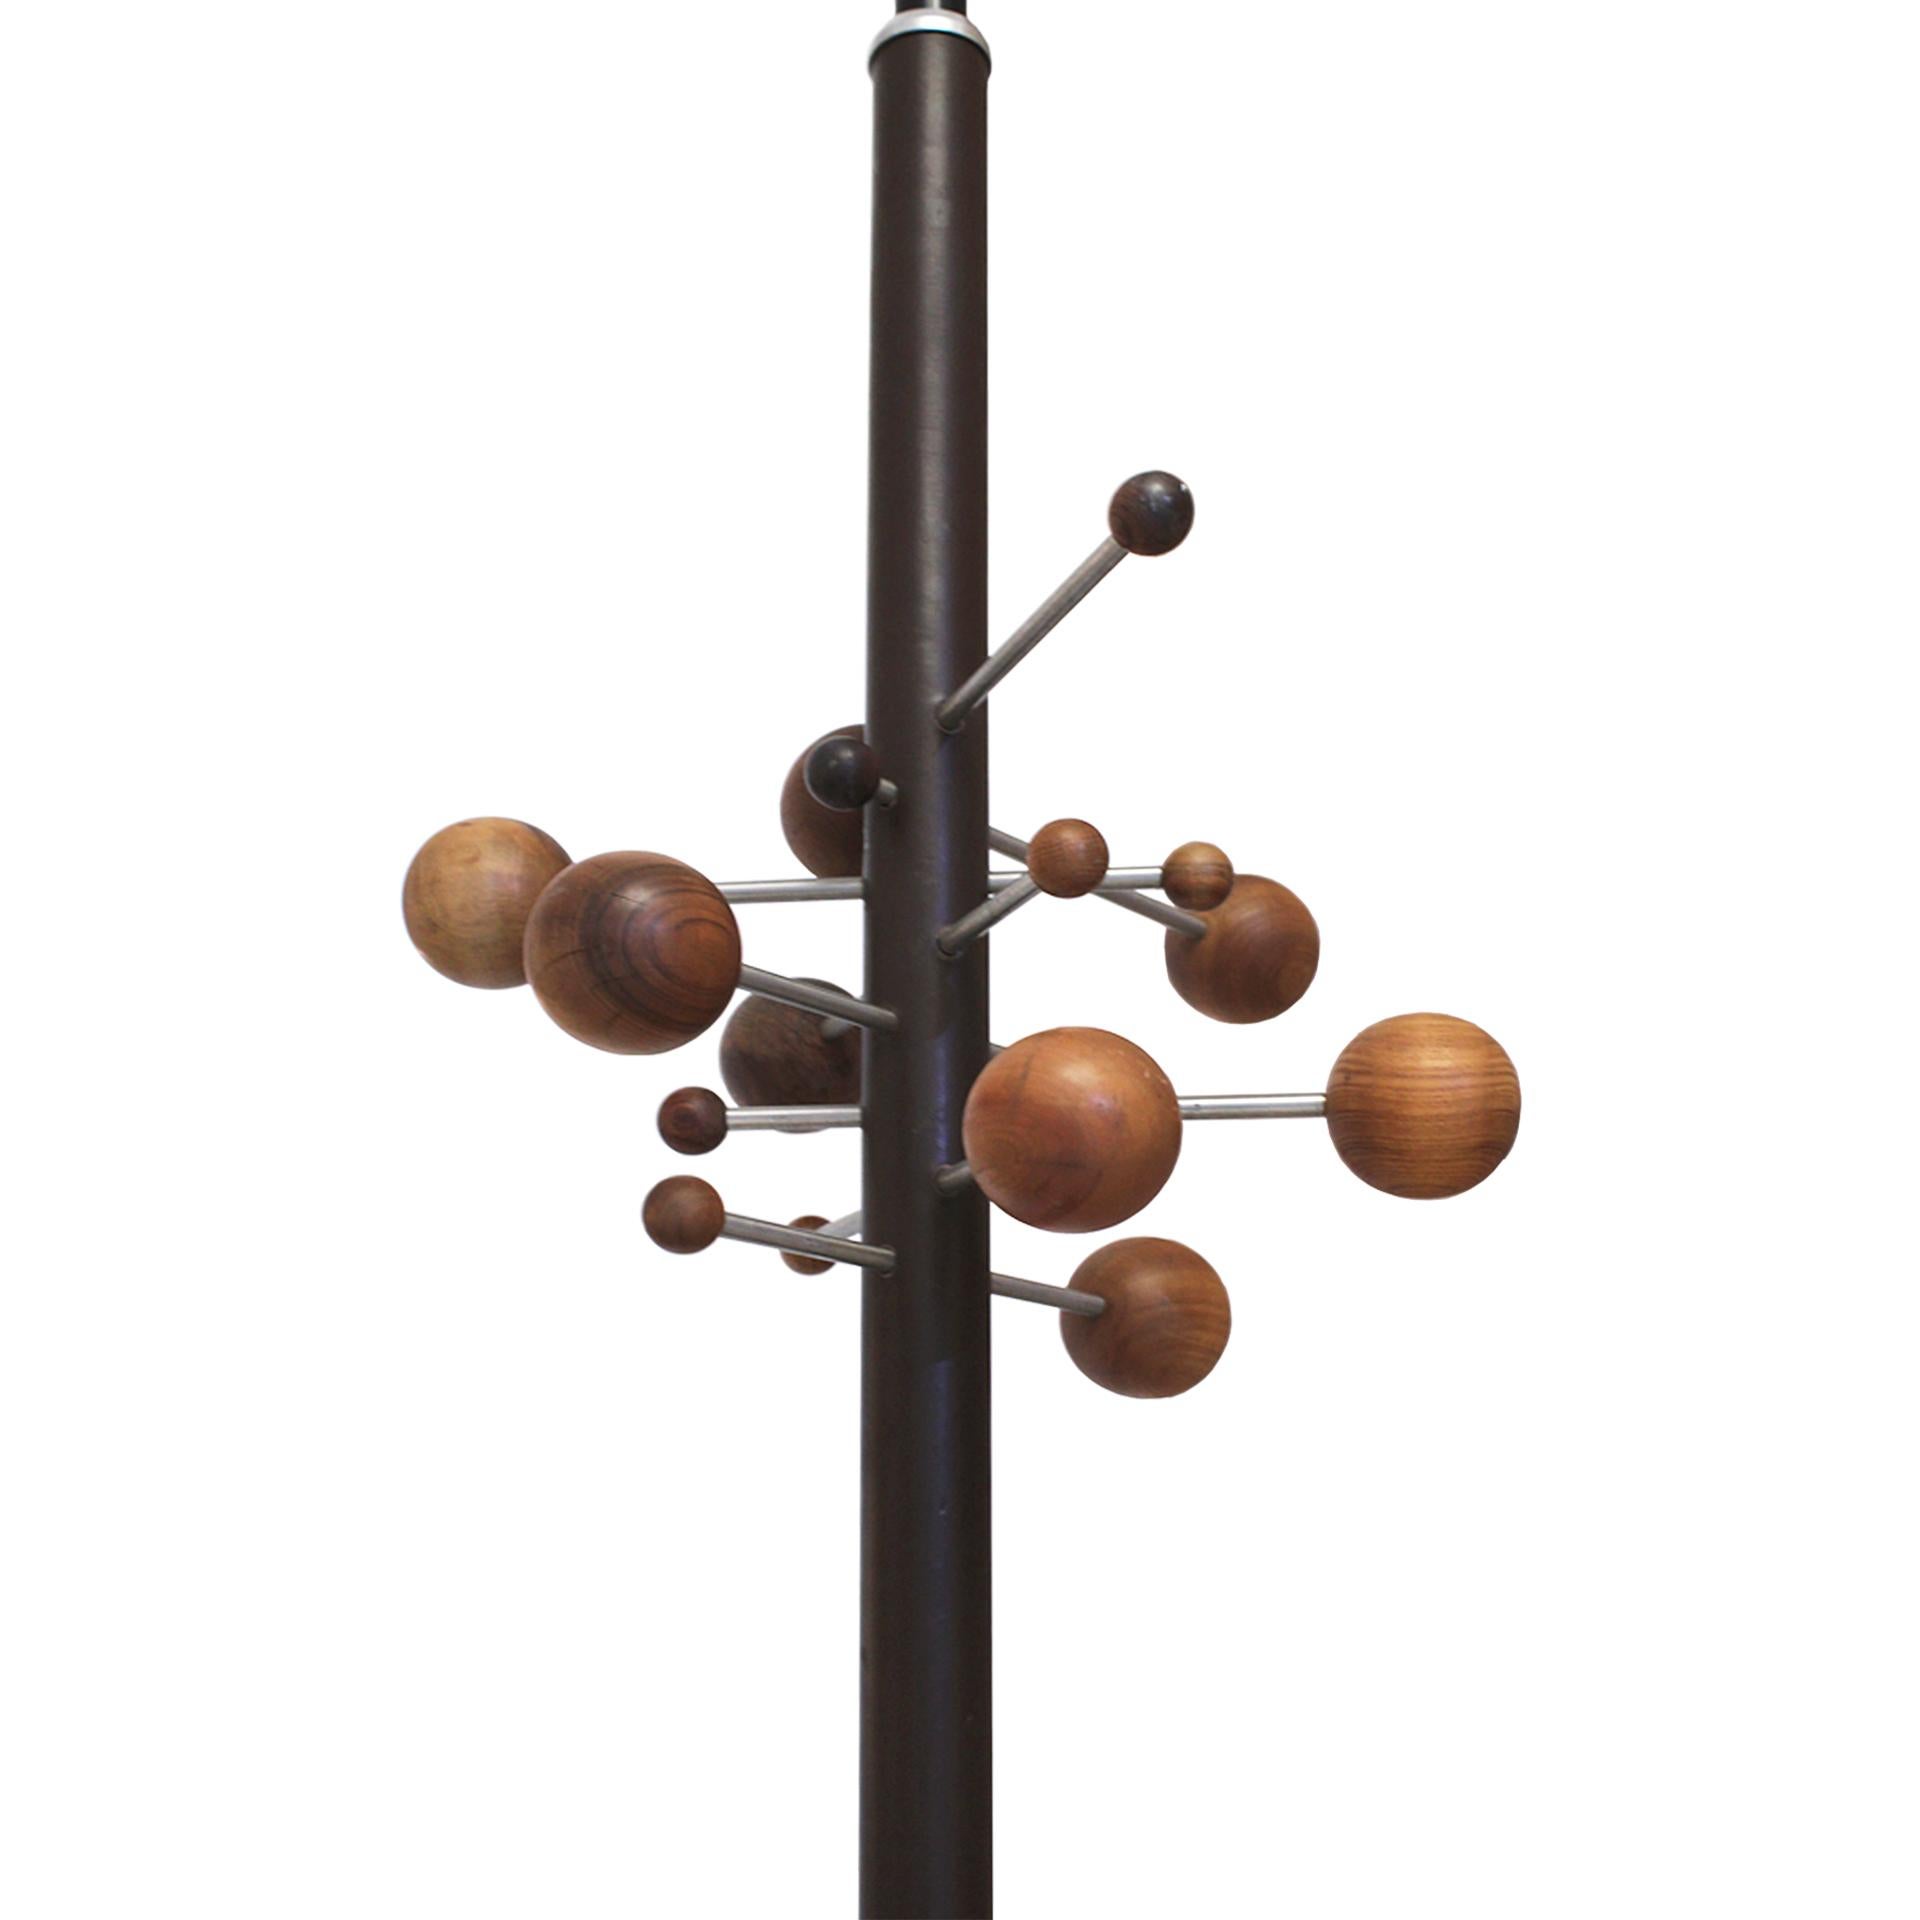 AT 16 model coat rack designed by Osvaldo Borsani for Tecno. Structure made up of two pieces, a fixed metal one lined with natural leather and the telescopic stem made of black lacquered metal. Spherical hangers made of wood.

Designed by the